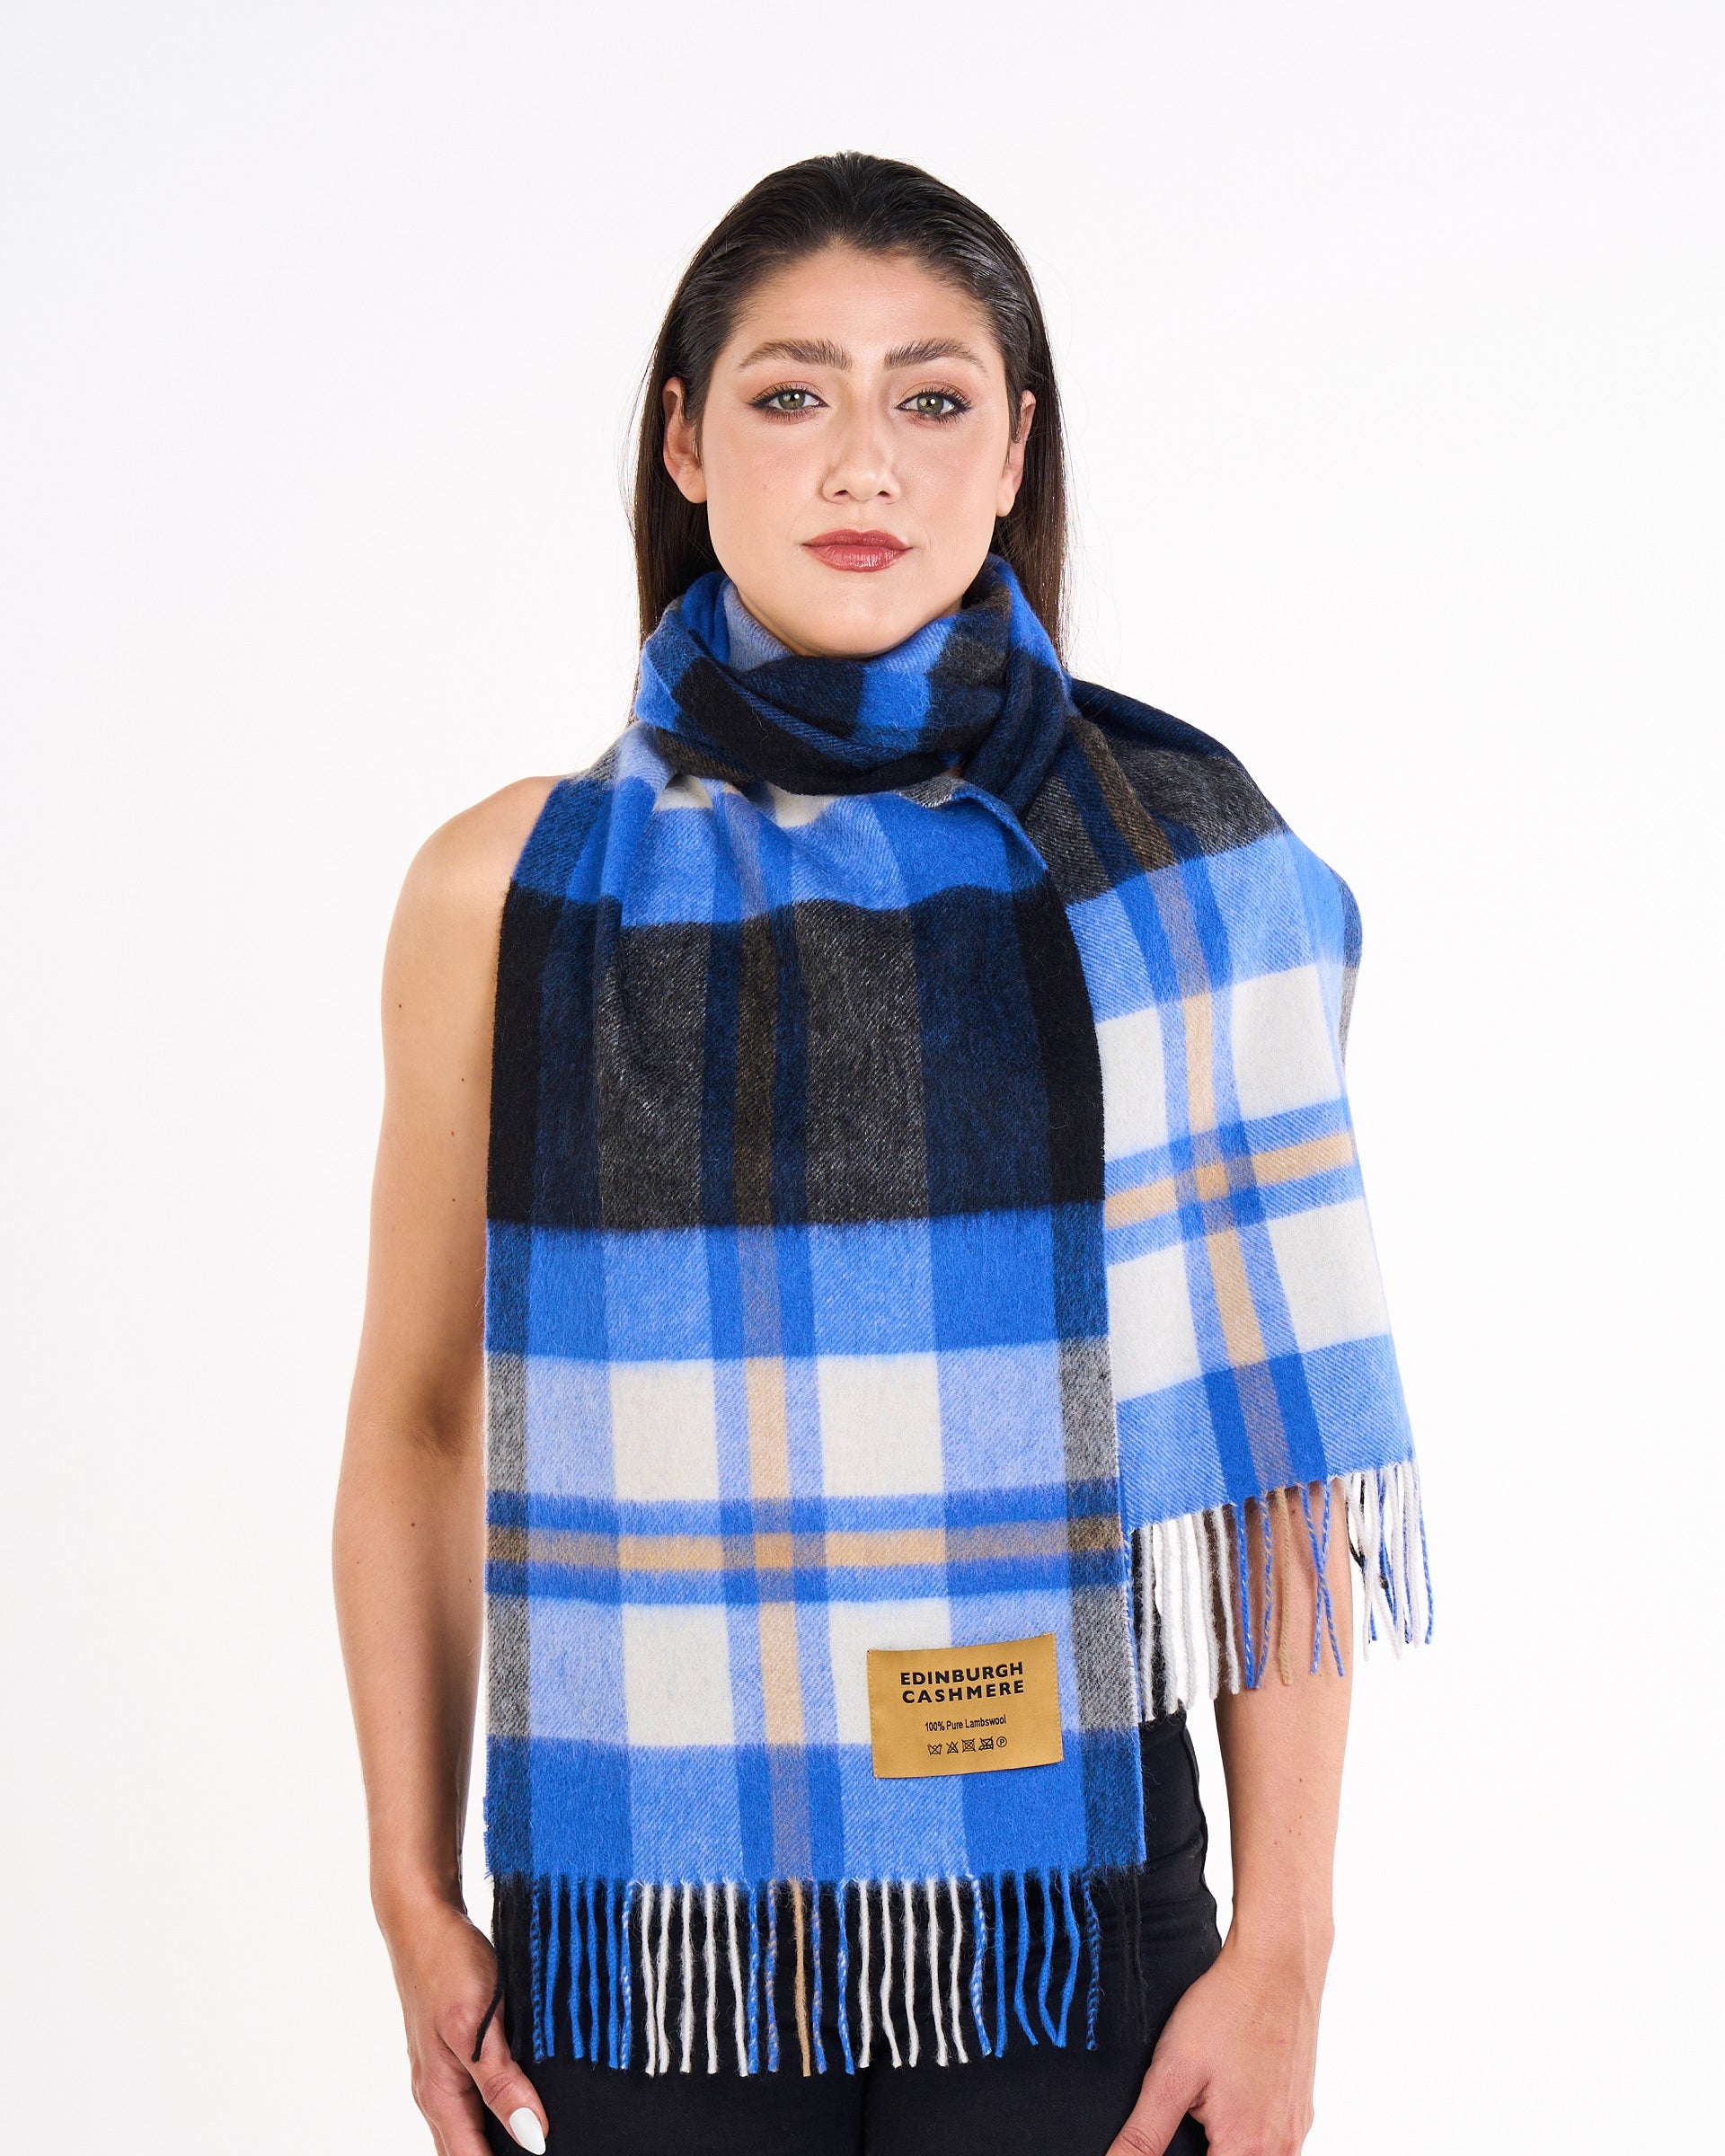 Luxury cashmere scarves for women